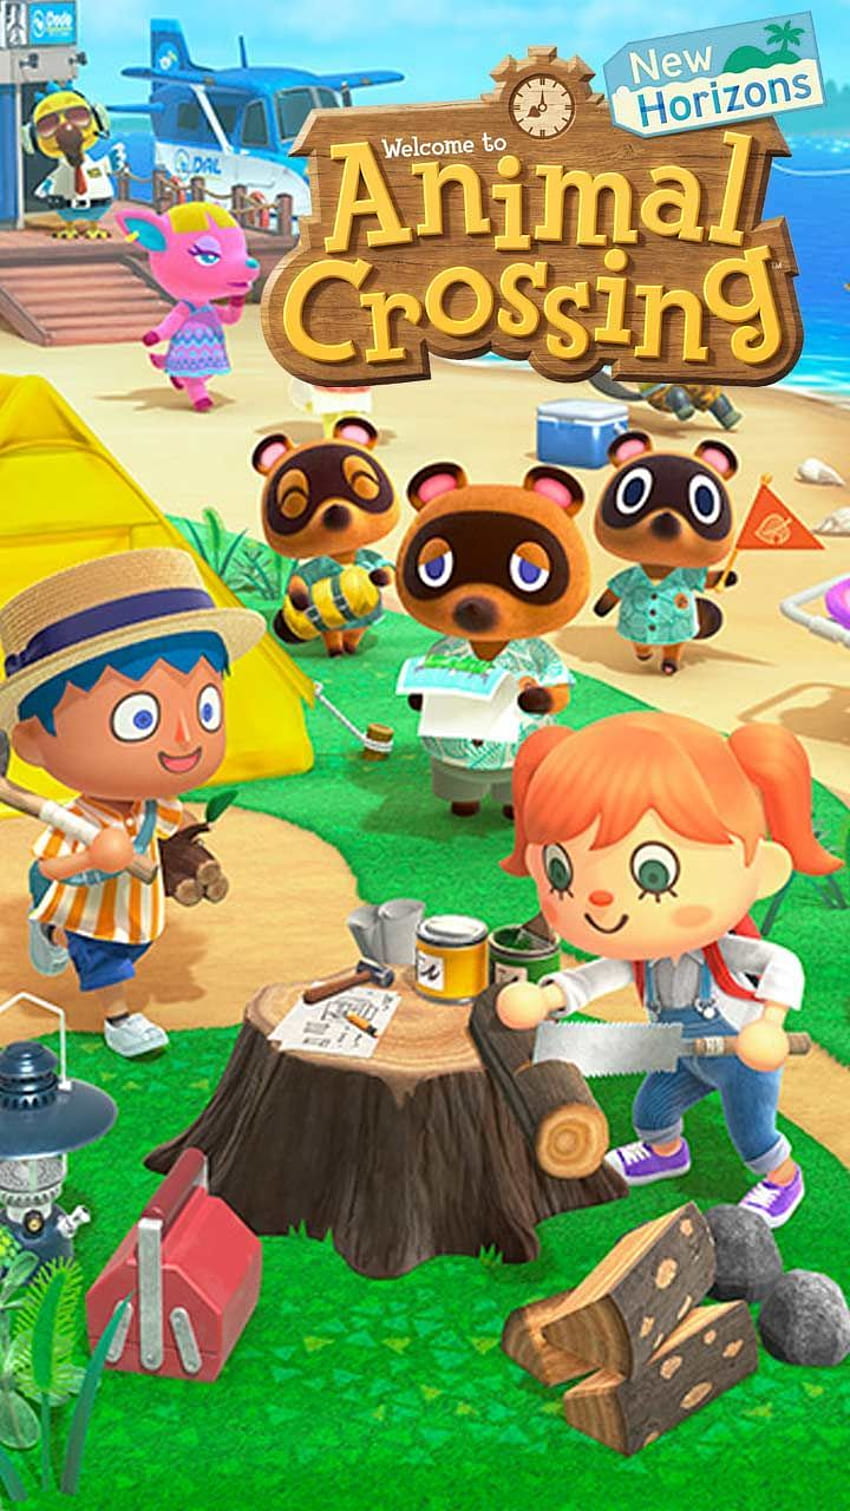 Animal crossing new horizons phone background art ideas for iphone android lock screen in 2020. Animal crossing, Android art,, Animalcrossing HD-Handy-Hintergrundbild